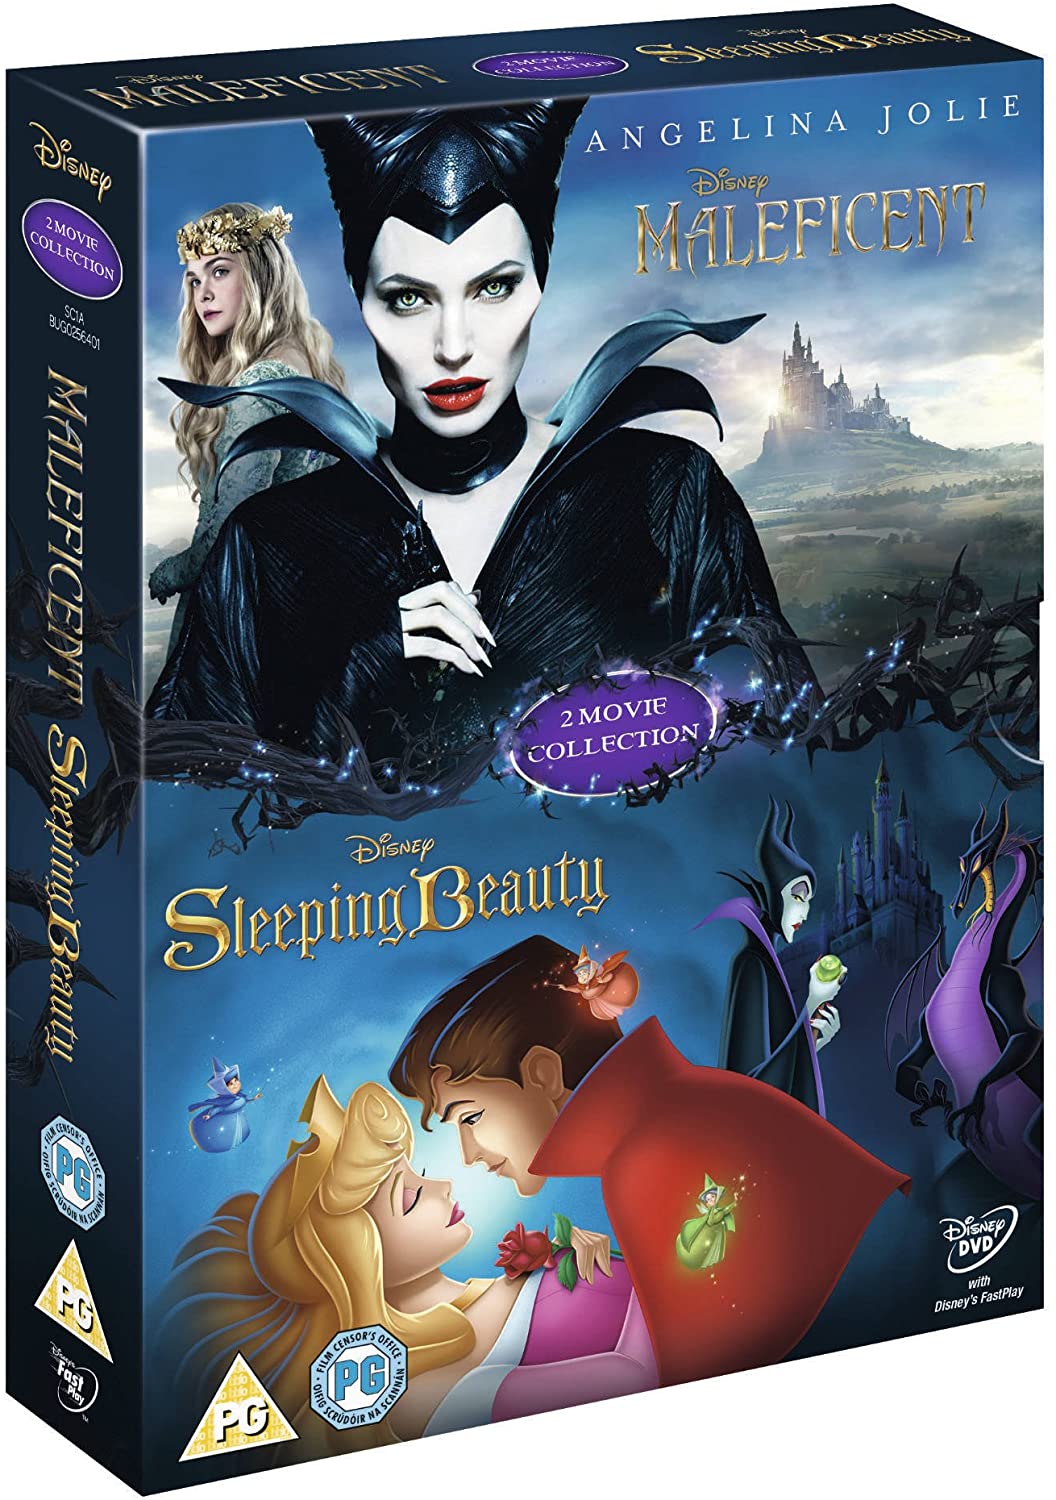 Maleficent/Sleeping Beauty Double Pack [2015]